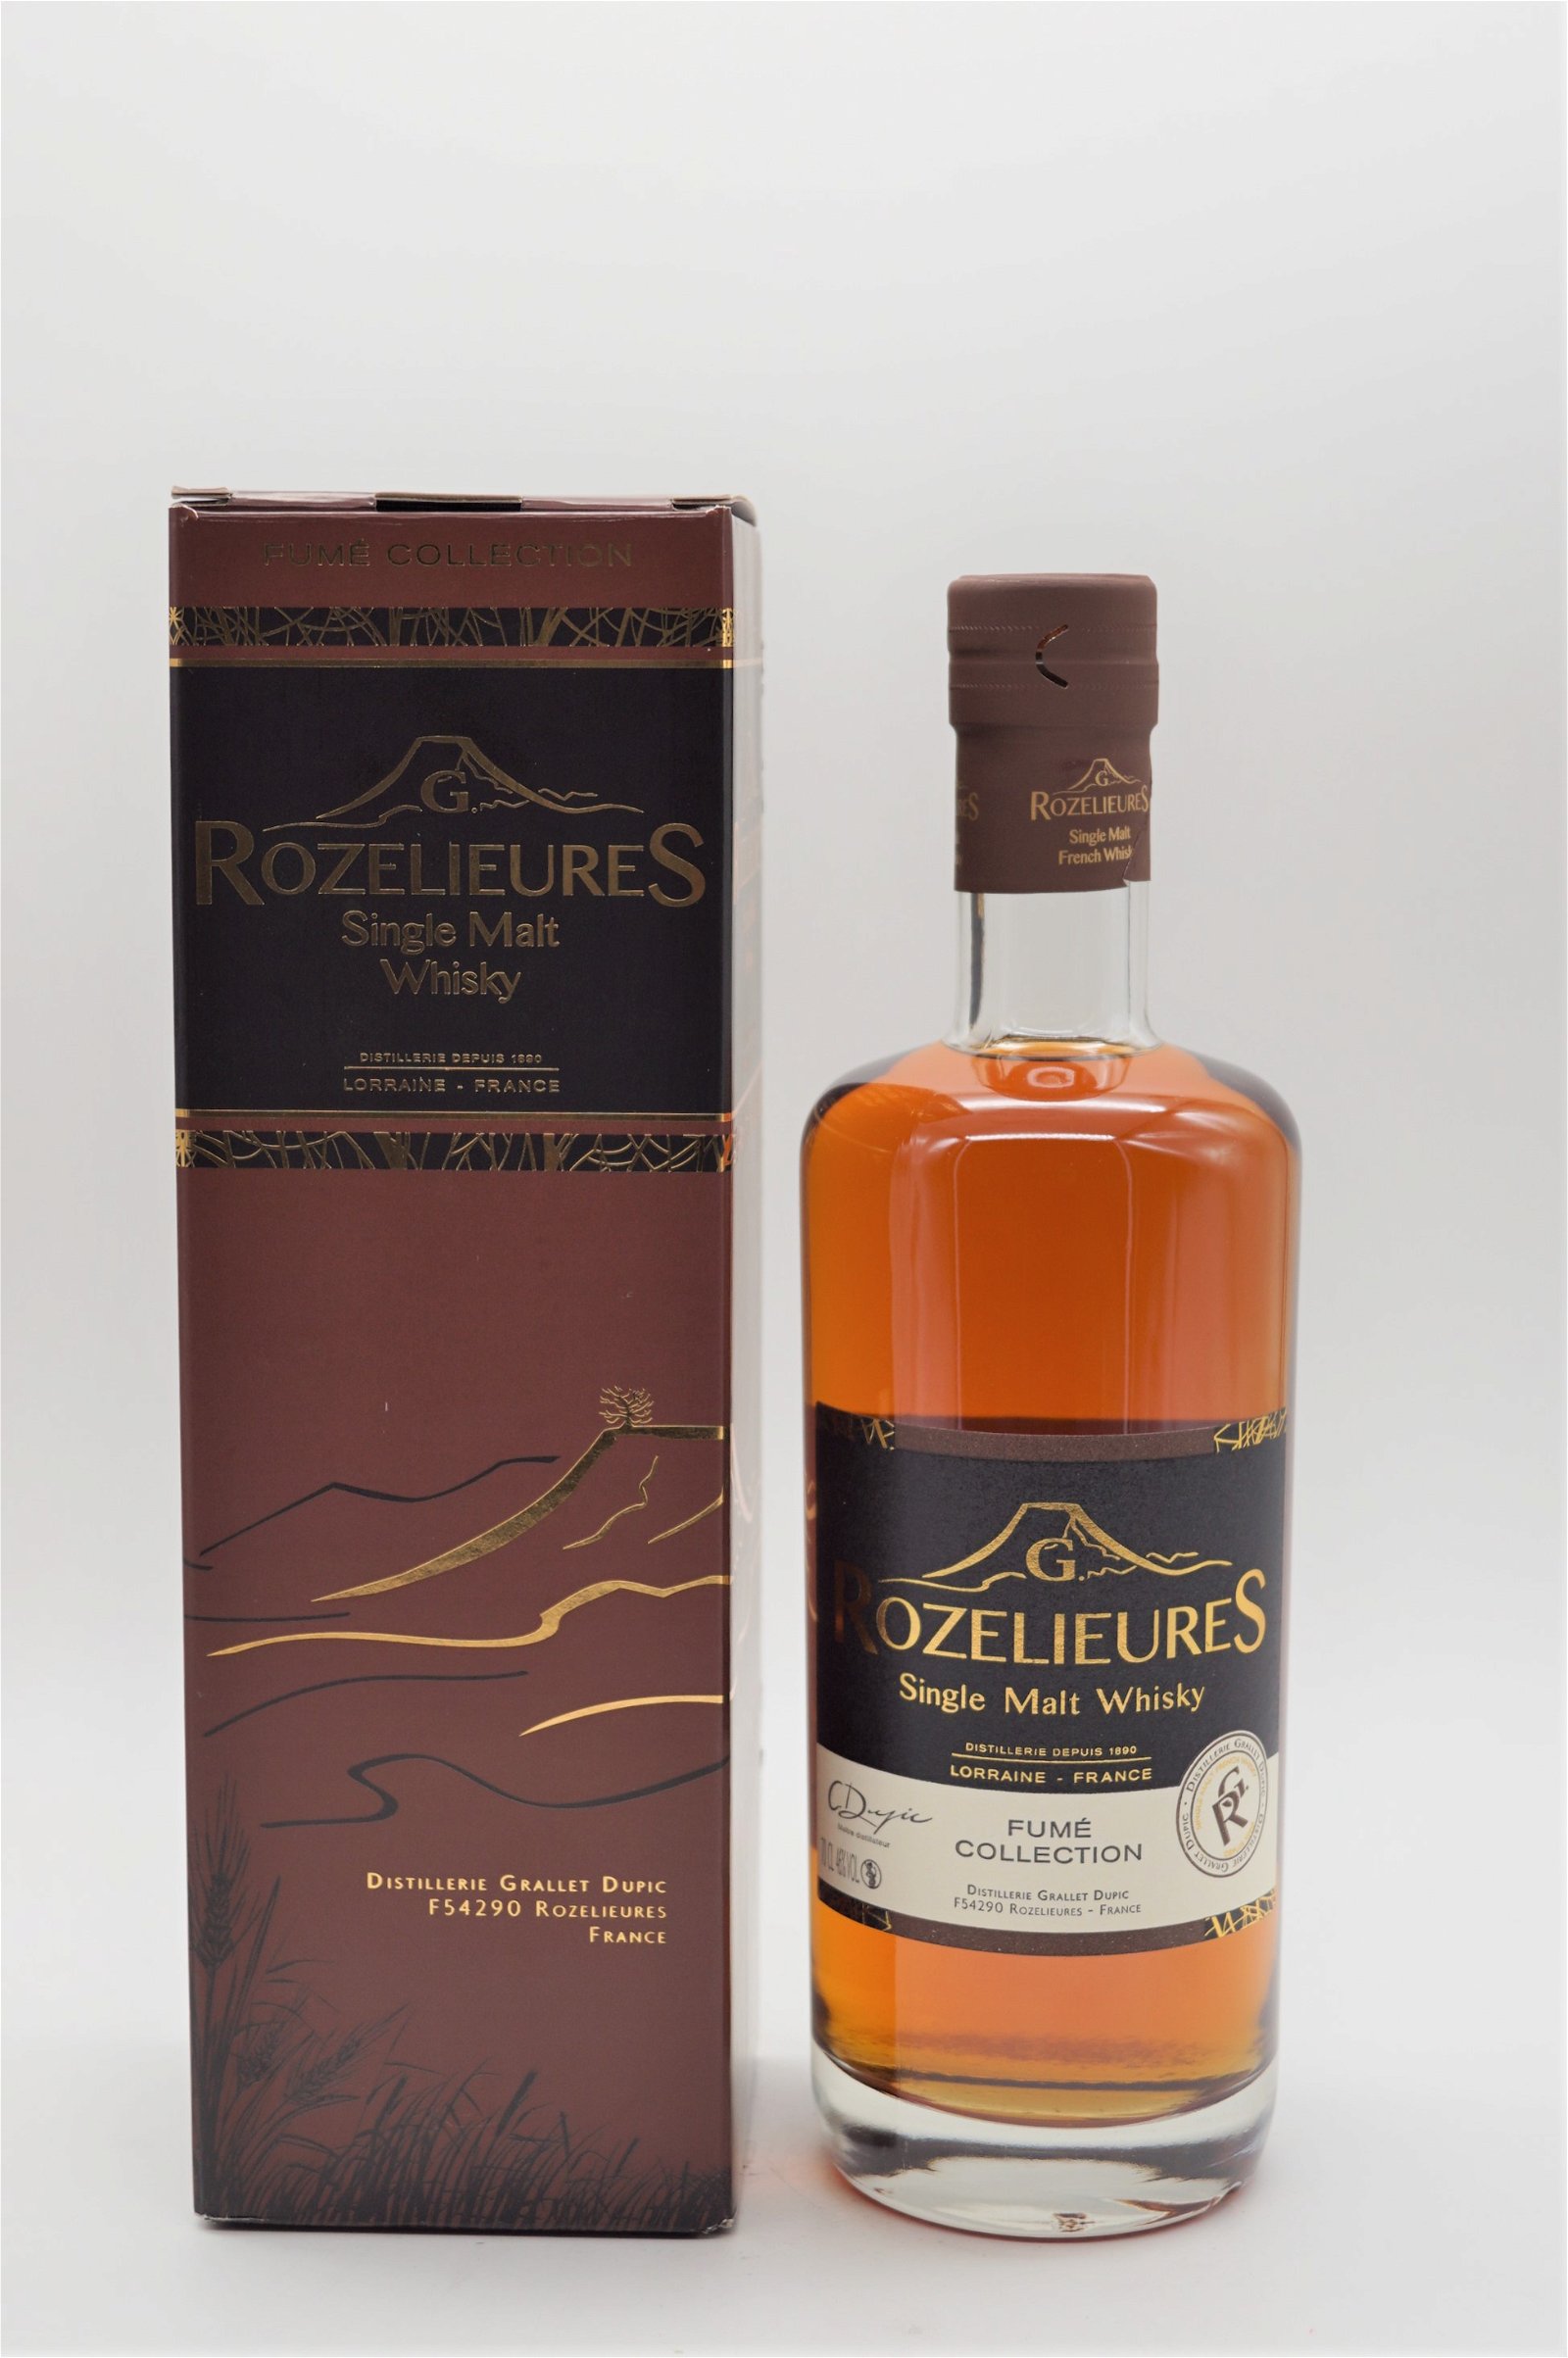 G. Rozelieures Fume Collection Single Malt Whisky 